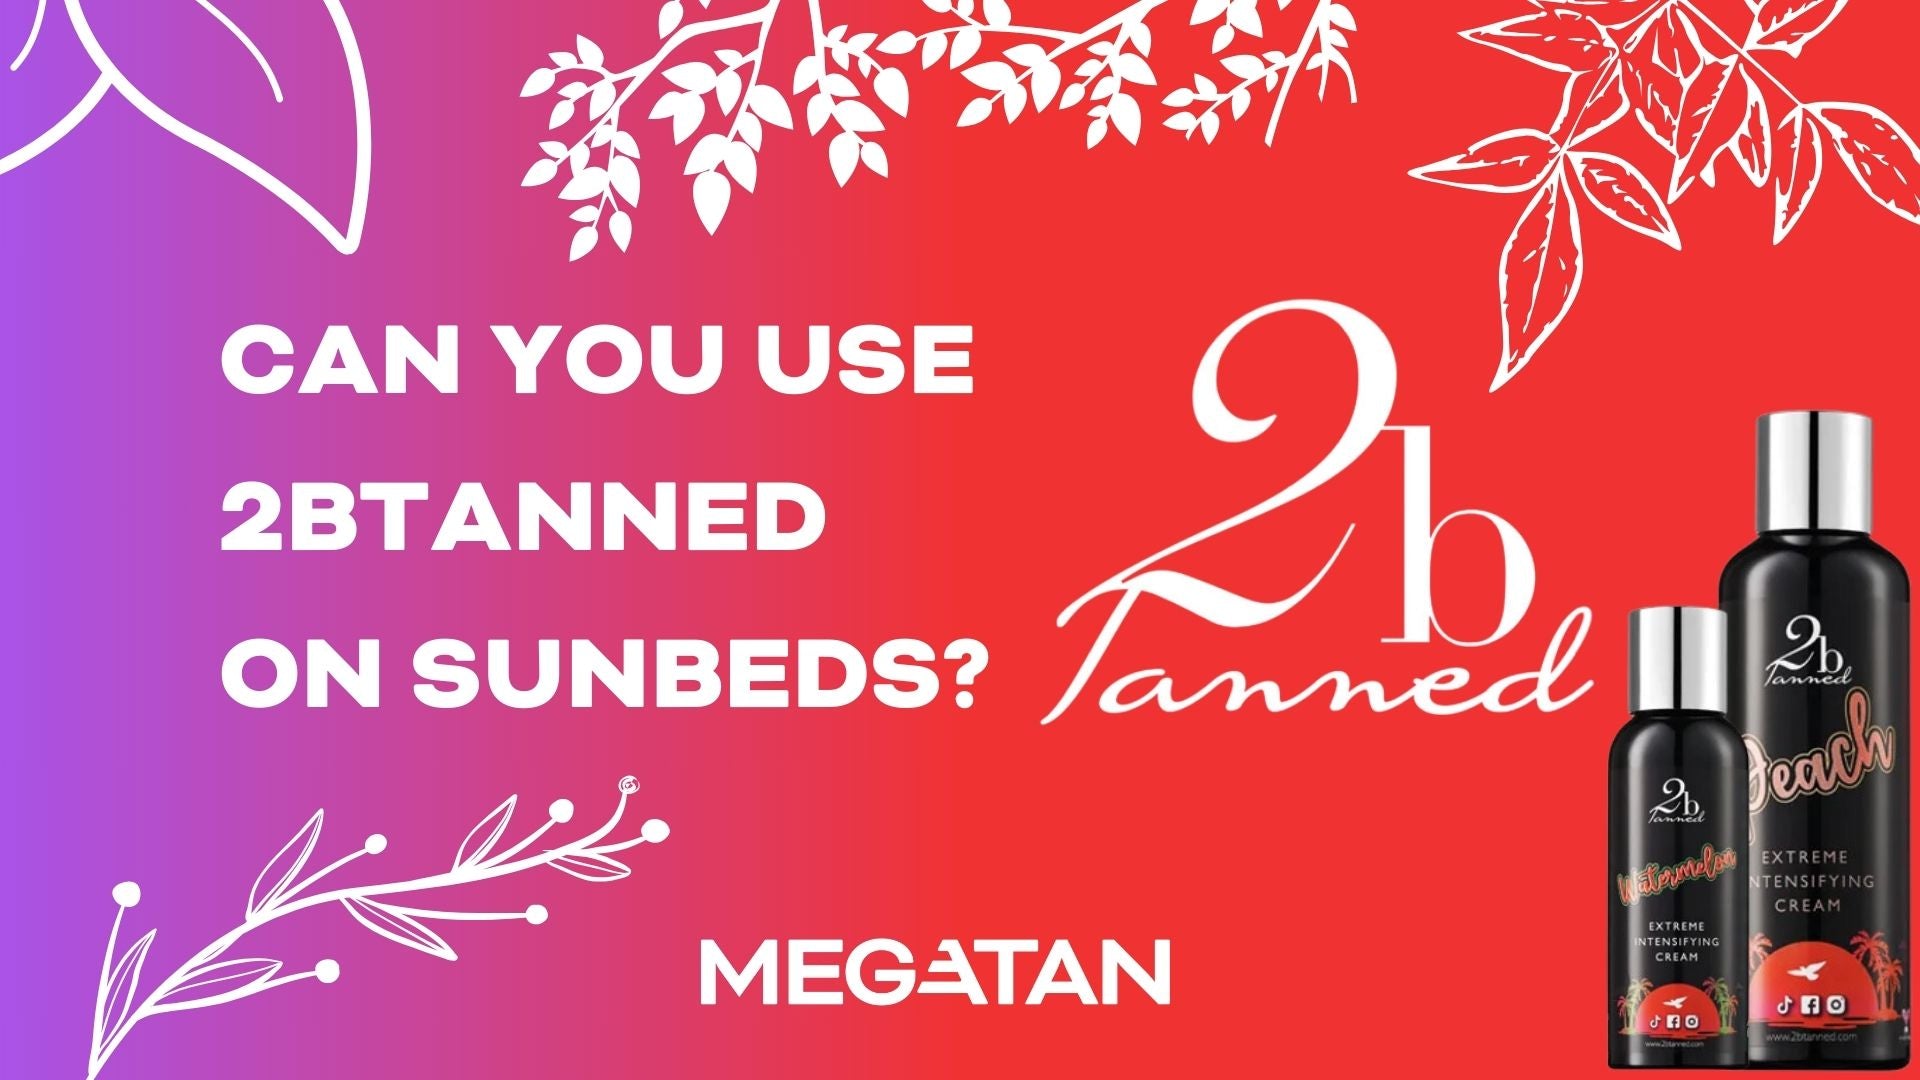 Can you use 2bTanned on sunbeds?